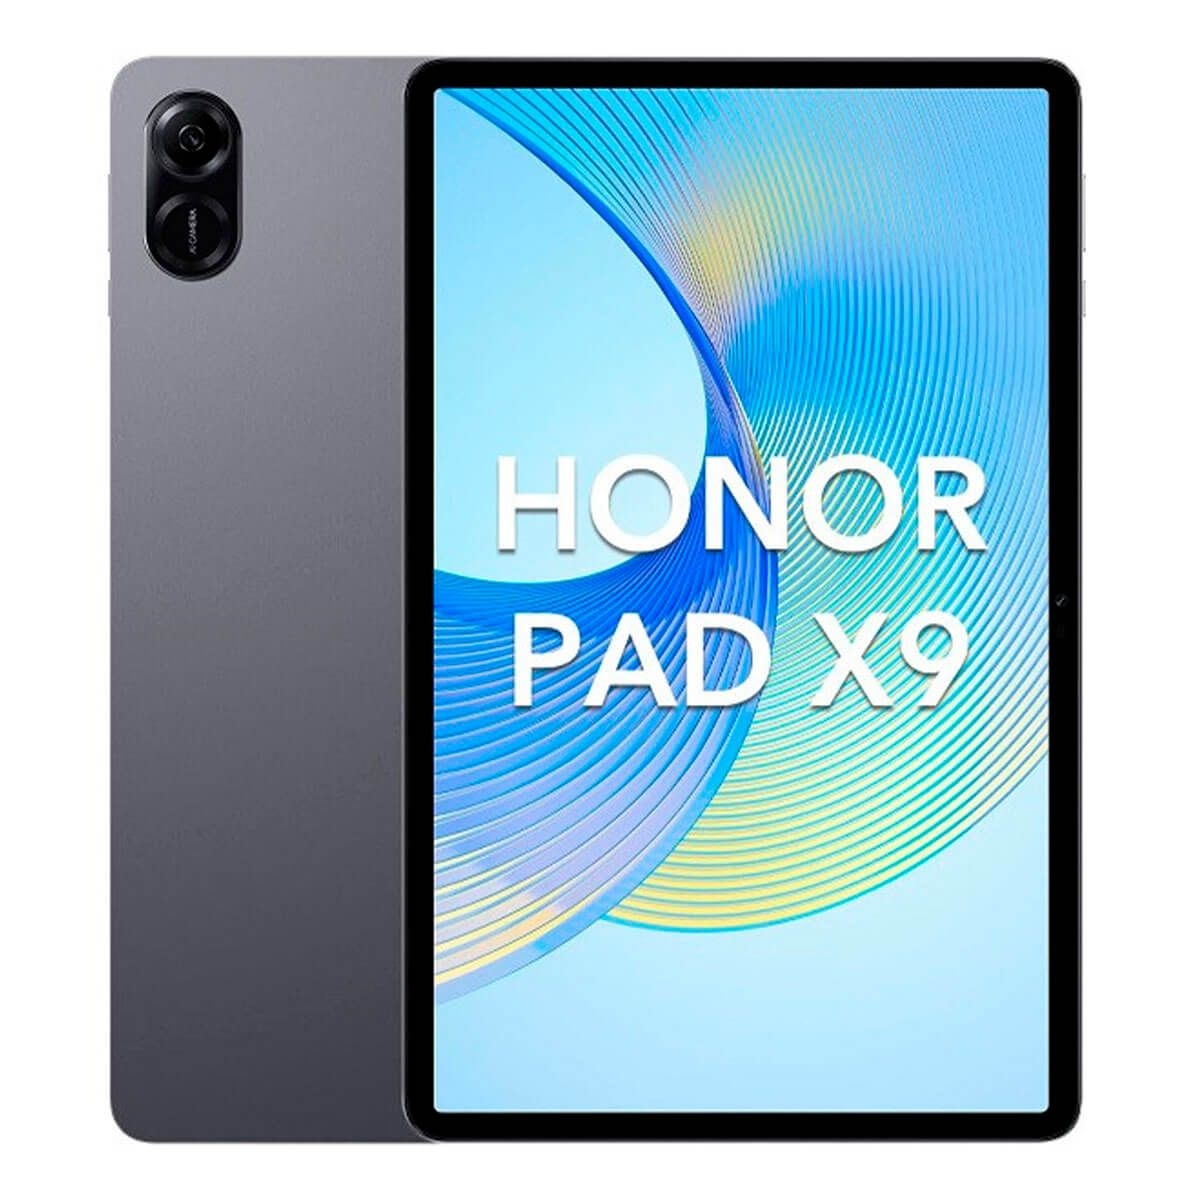 Honor Pad X9 11.5-inch 4gb Ram 128gb Rom Tablet Price in BD